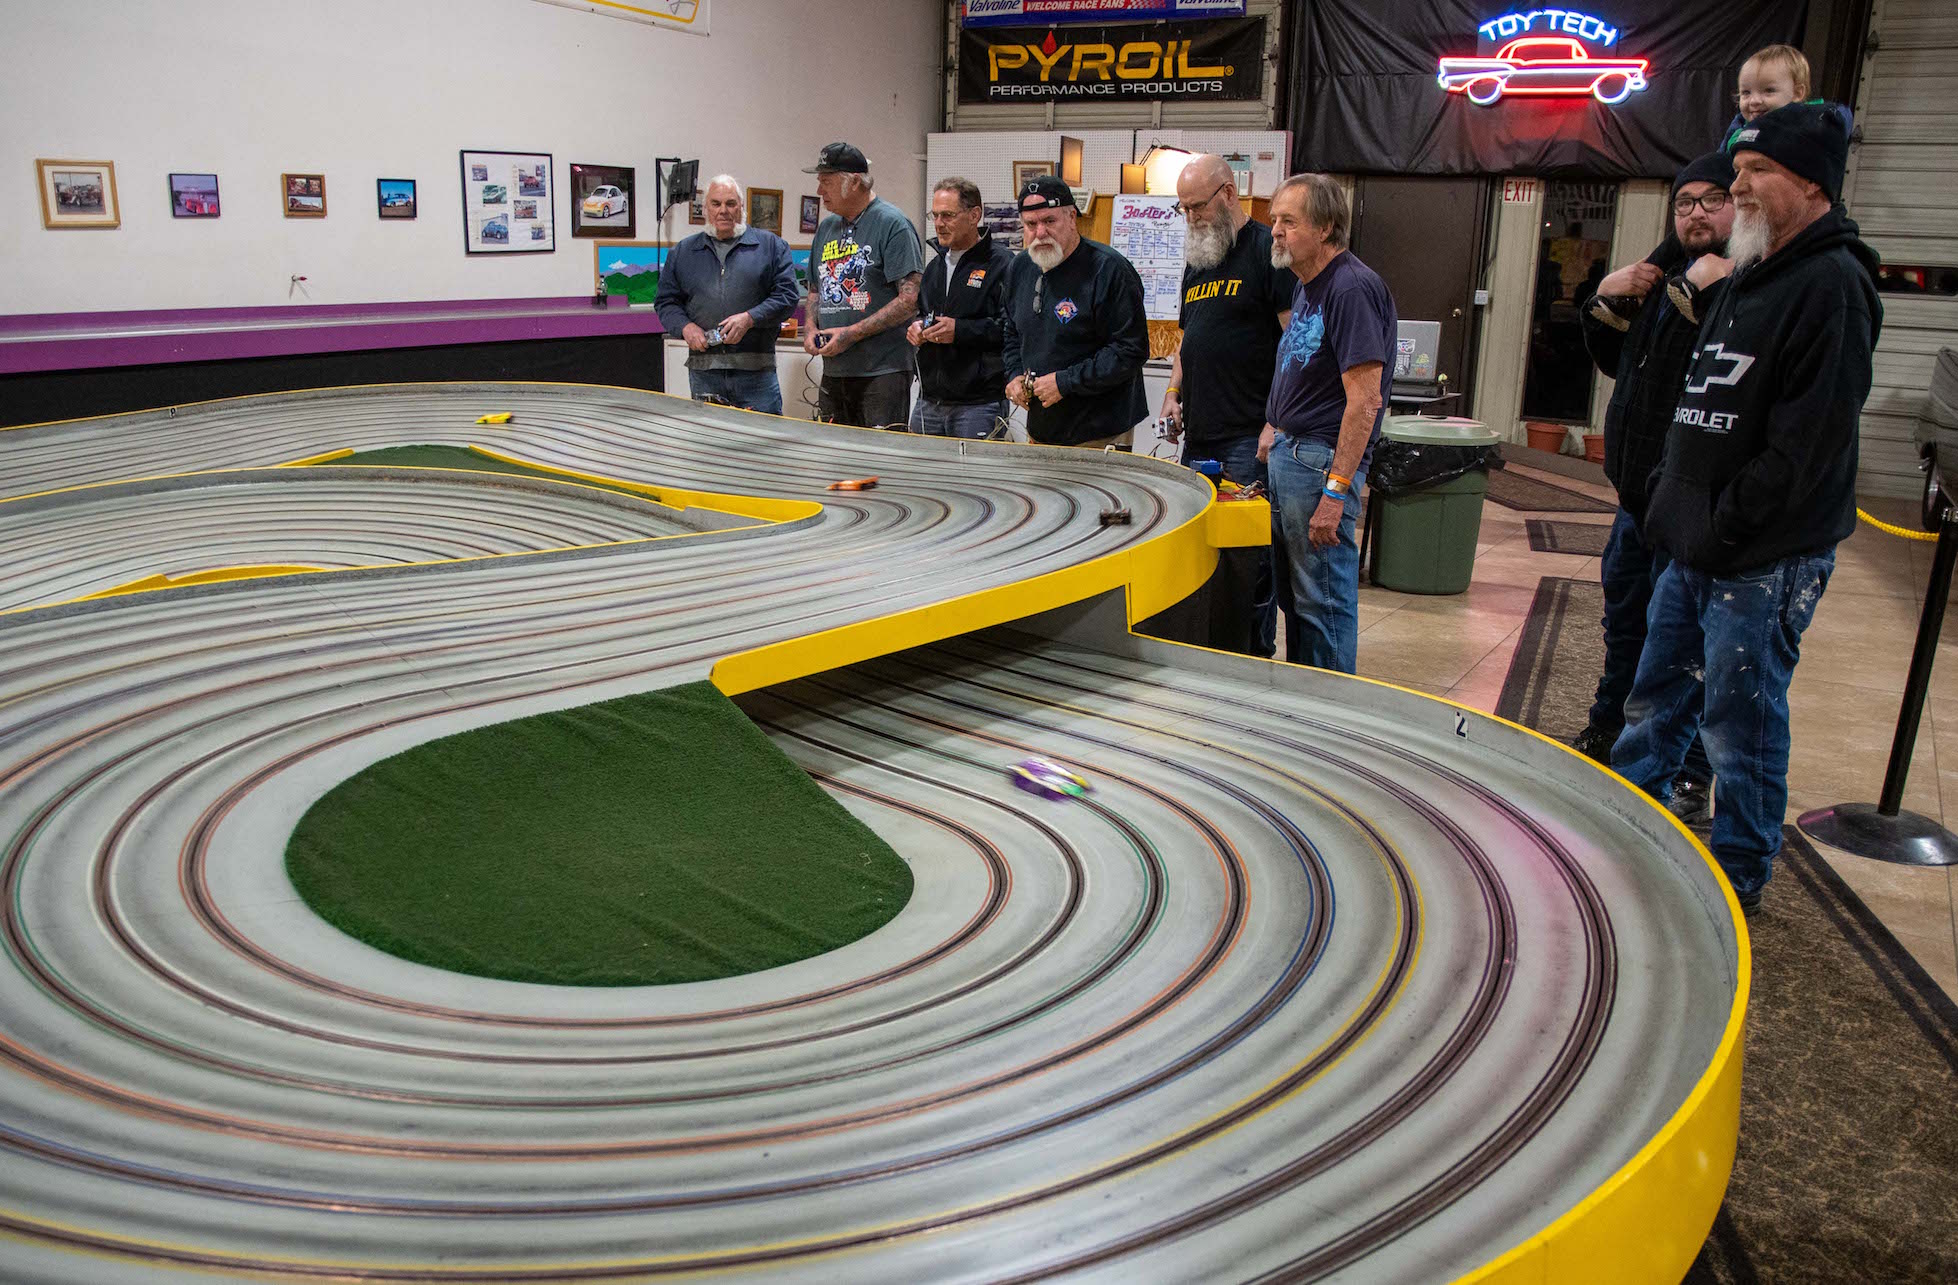 The 3 Best Slot Car Racing Sets for the Money - The Toyz